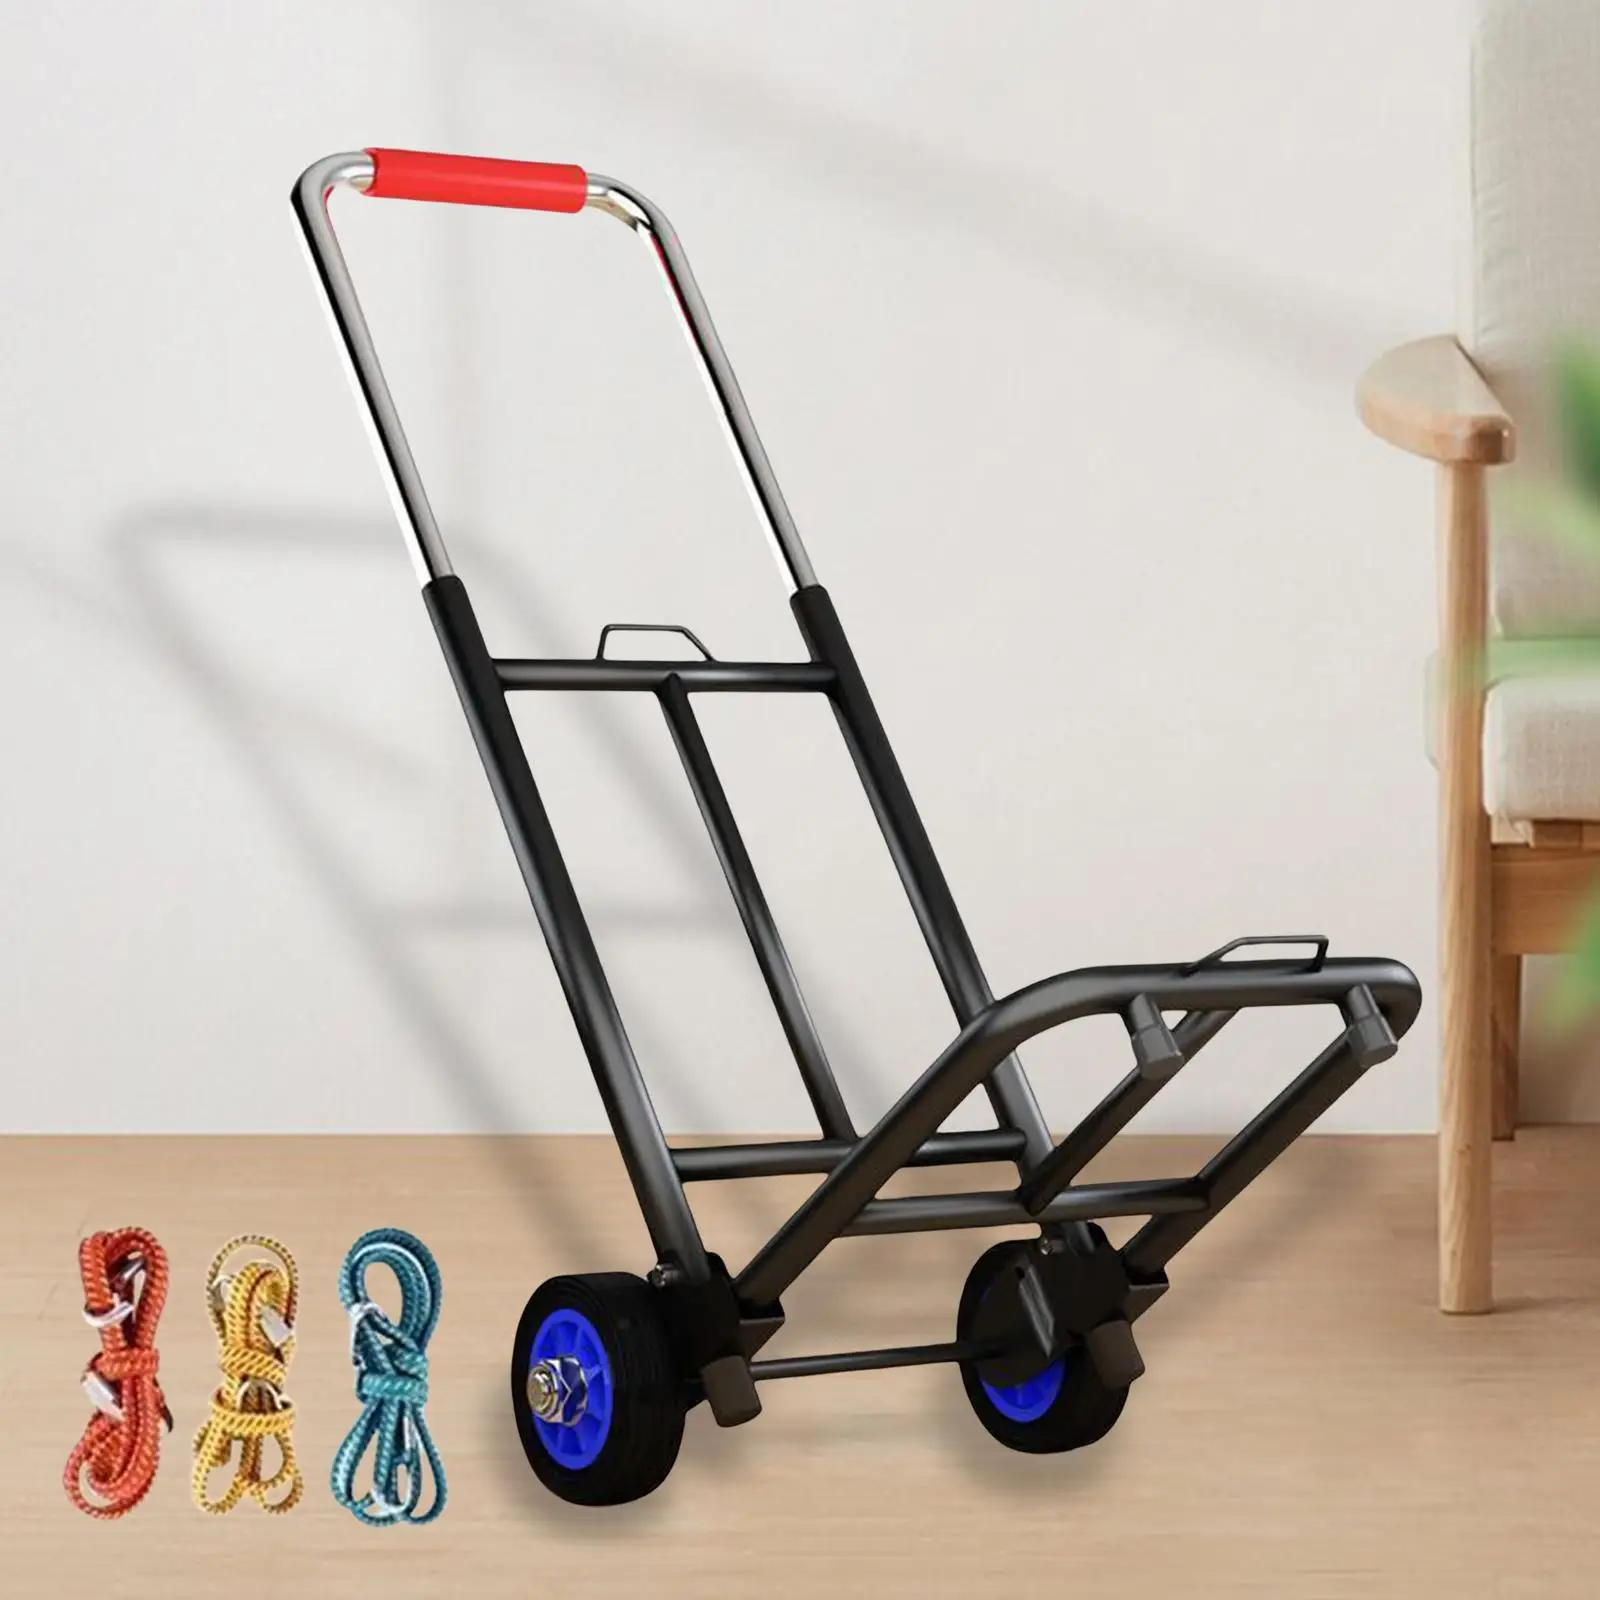 Foldable Hand Truck Adjustable Handle Collapsible Trolley Cart for Couriers 26x42cm Platform